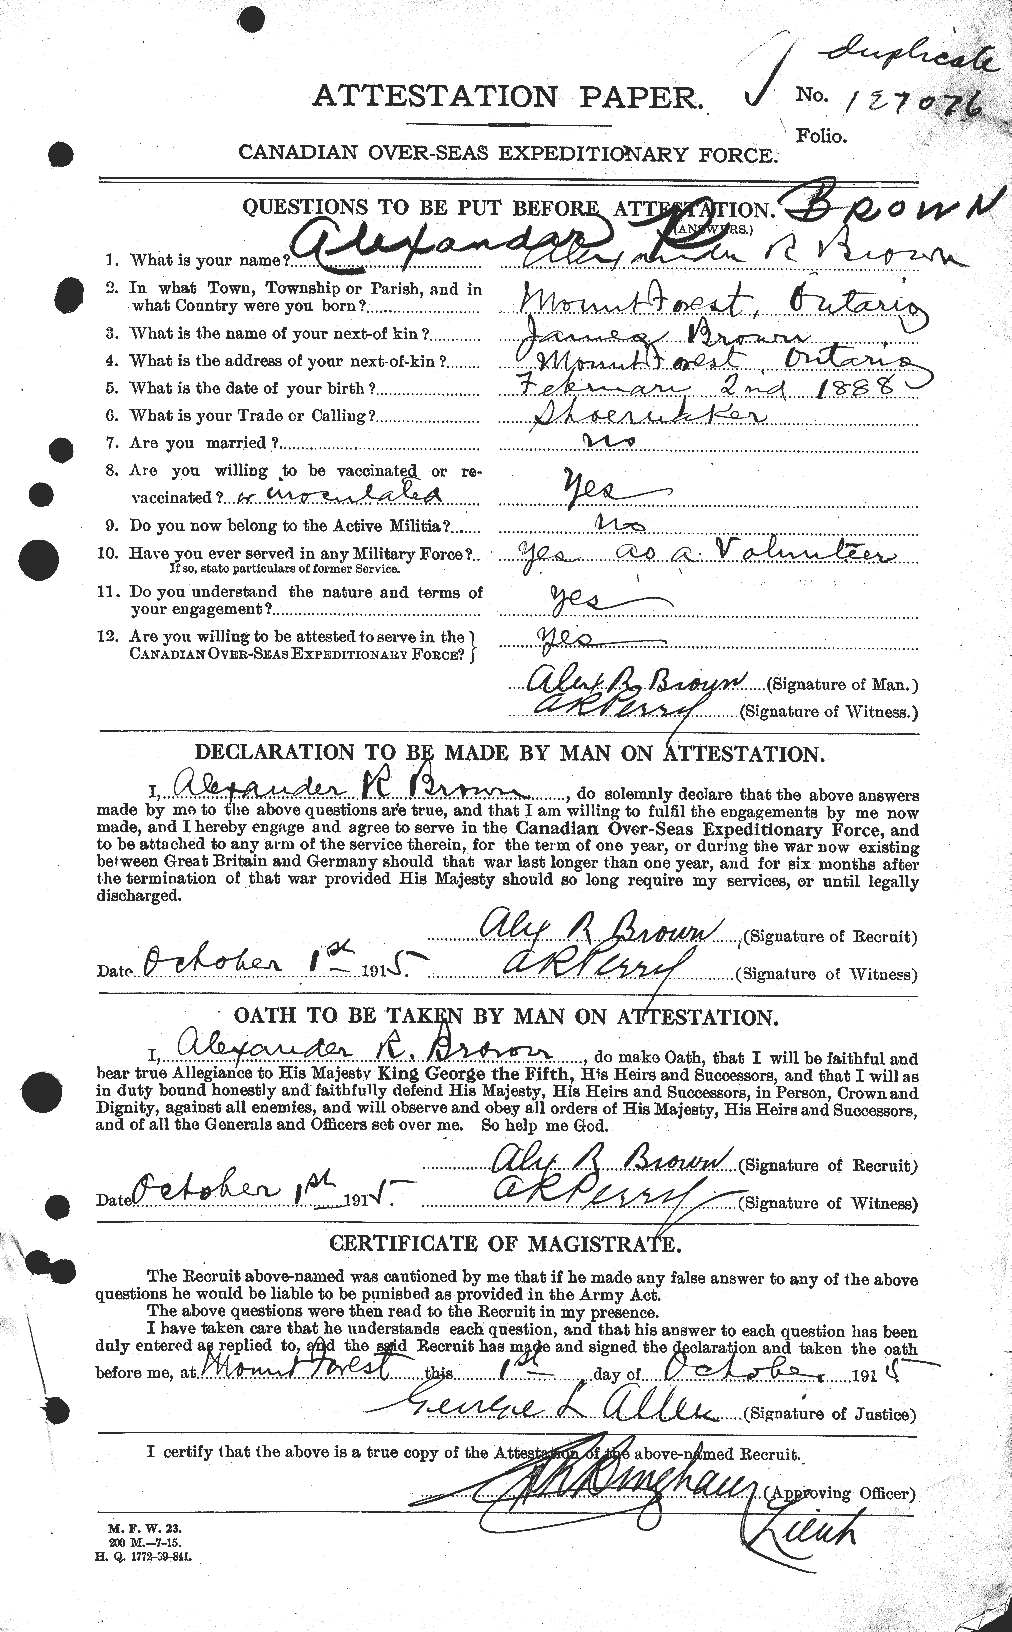 Personnel Records of the First World War - CEF 266979a